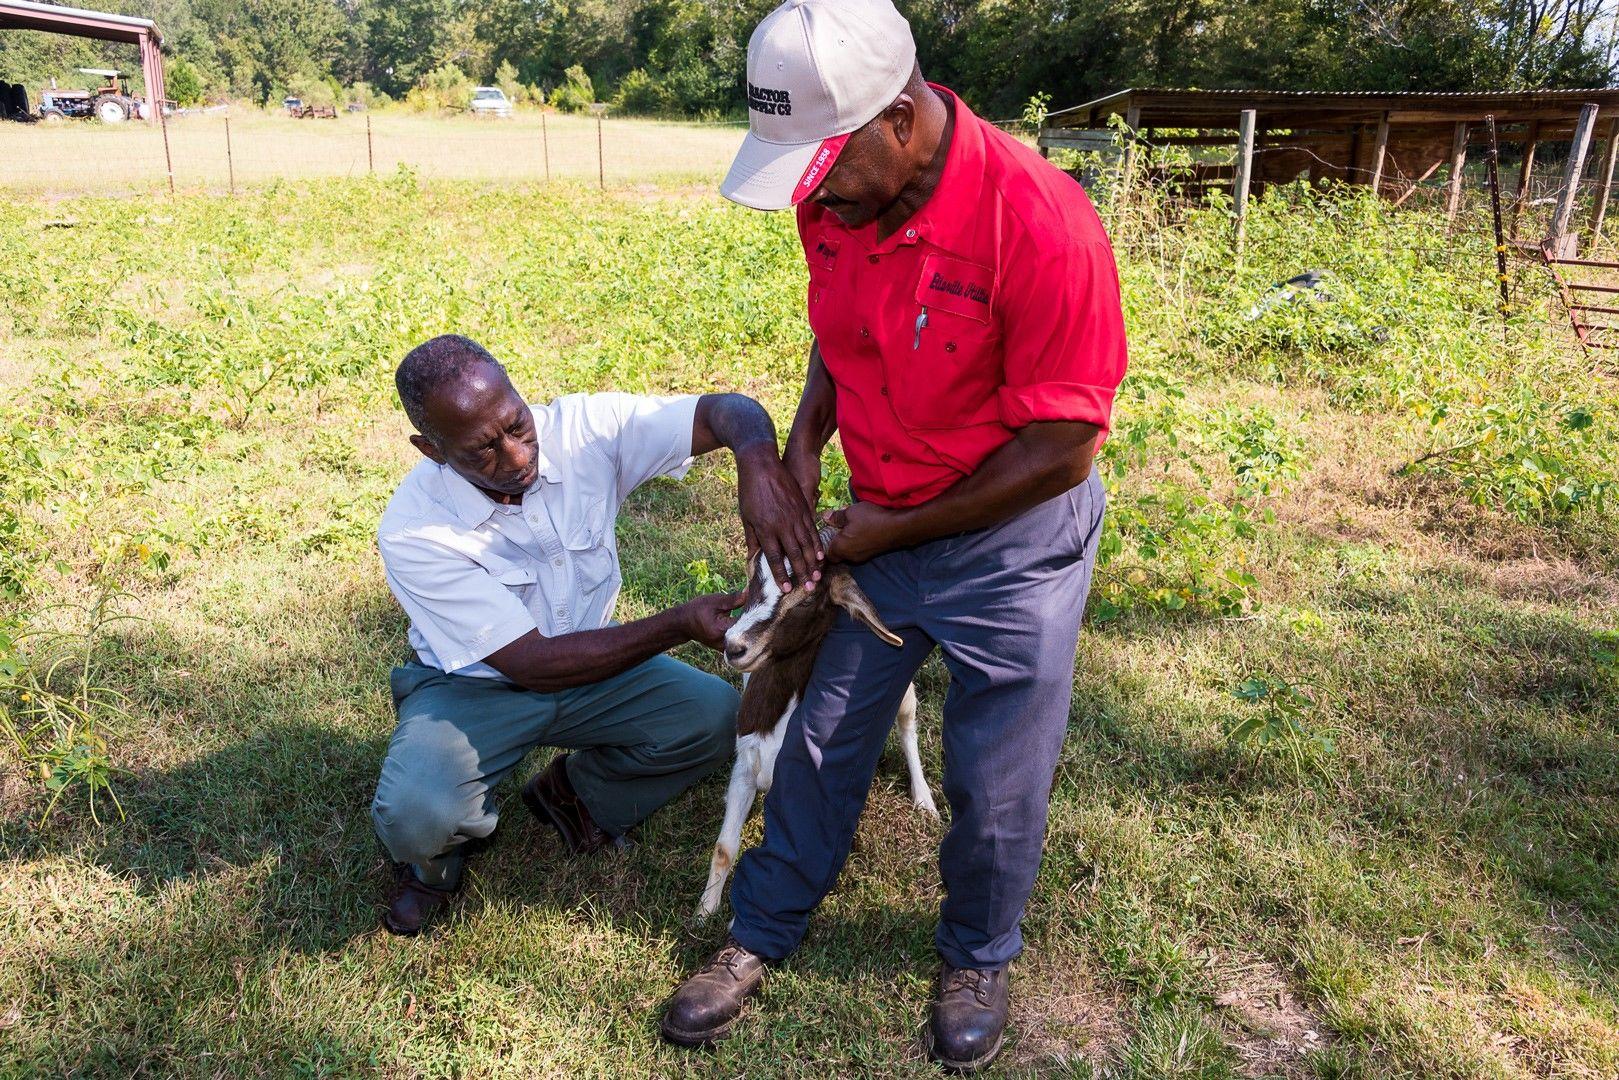 Ricky Waters (left) FVSU Macon County program assistant assists his client Wilfred Johnson (right) in examining a goat for disease.